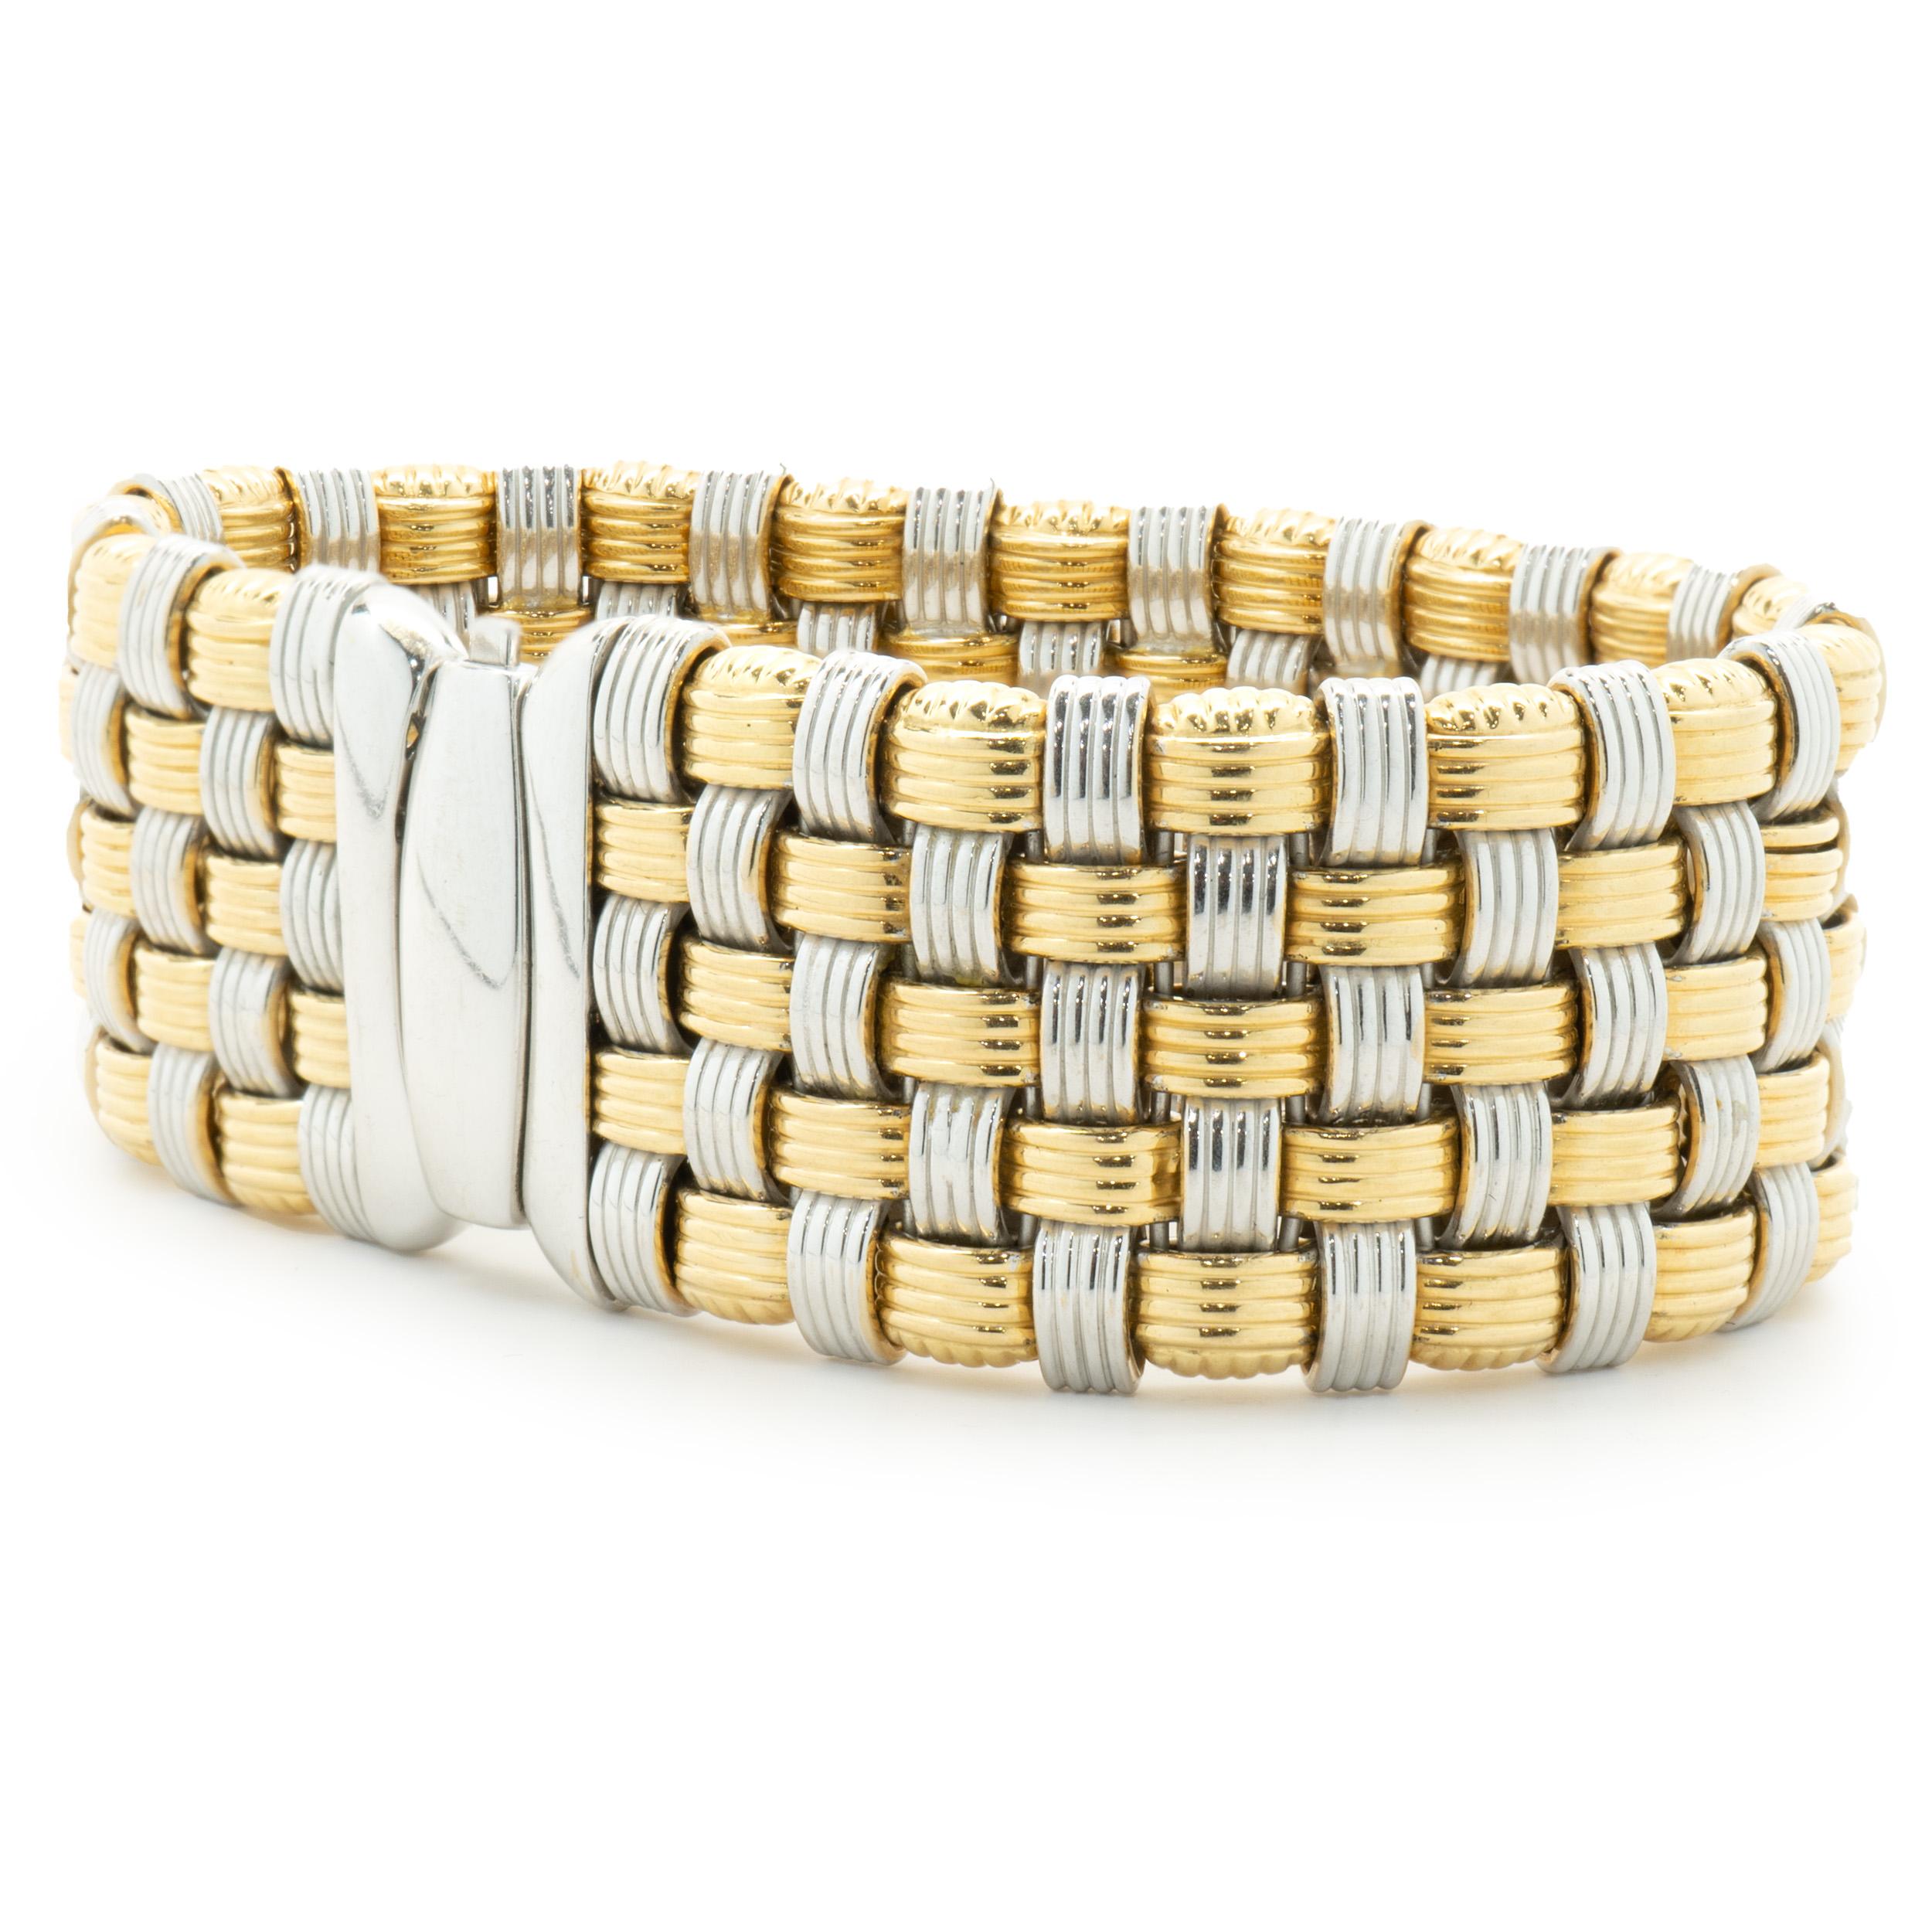 Material: 18K yellow & white gold
Dimensions: bracelet will fit up to an 7.5-inch wrist
Weight: 71.97 grams
